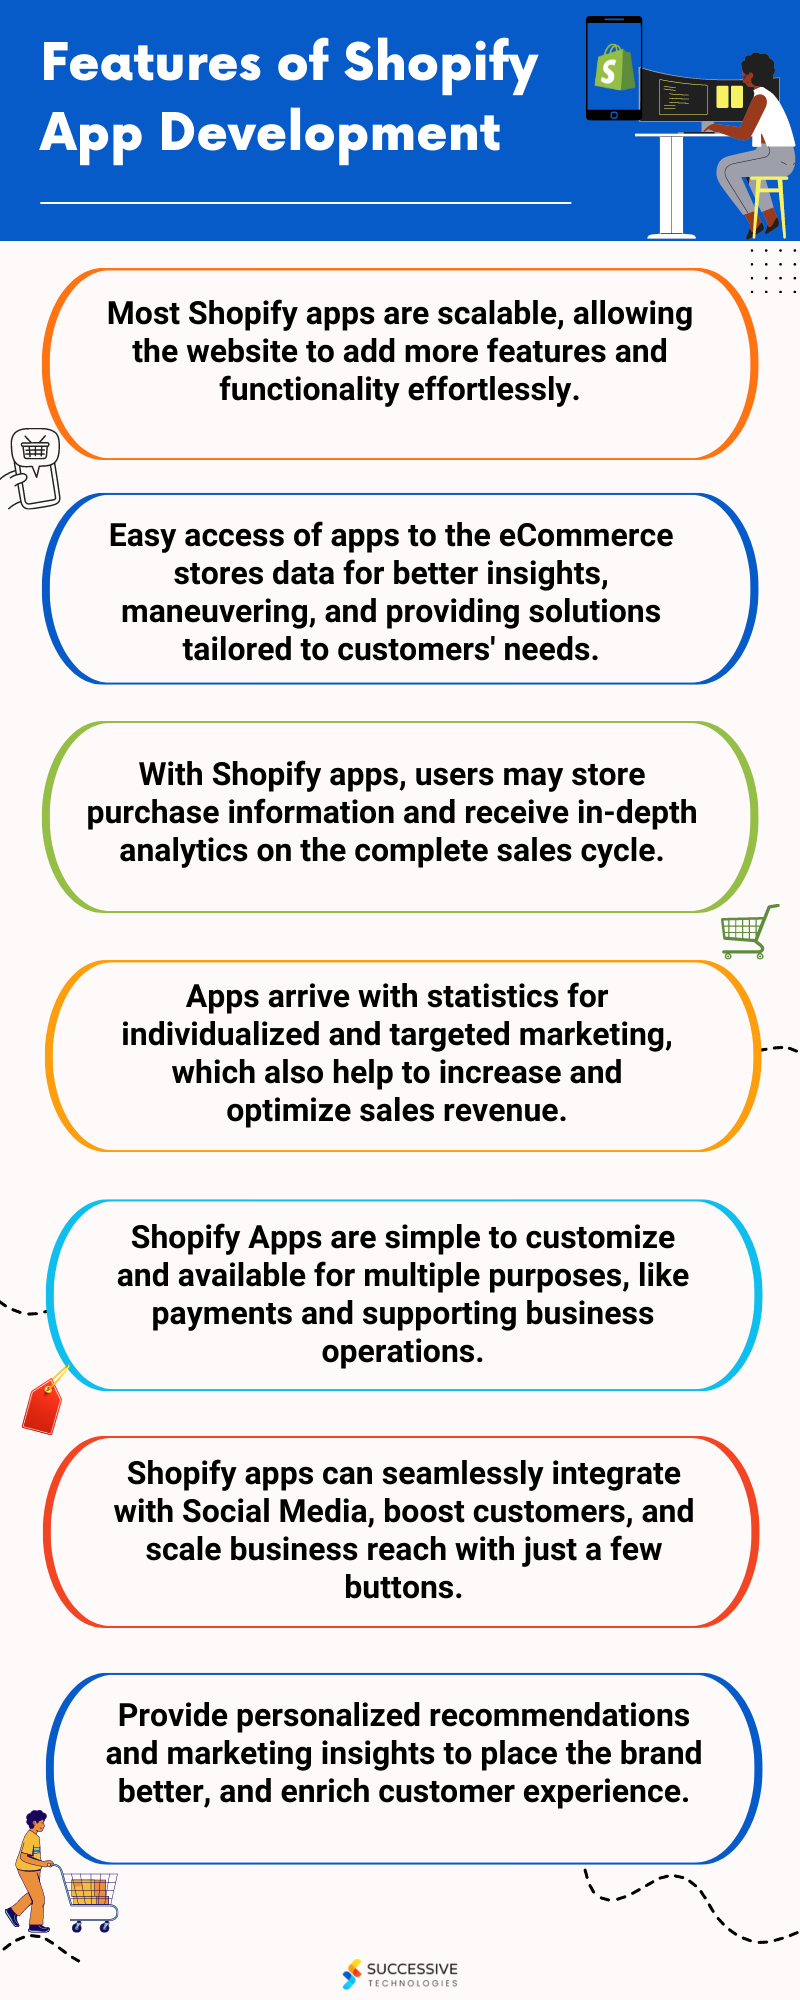 Features of Shopify App Development